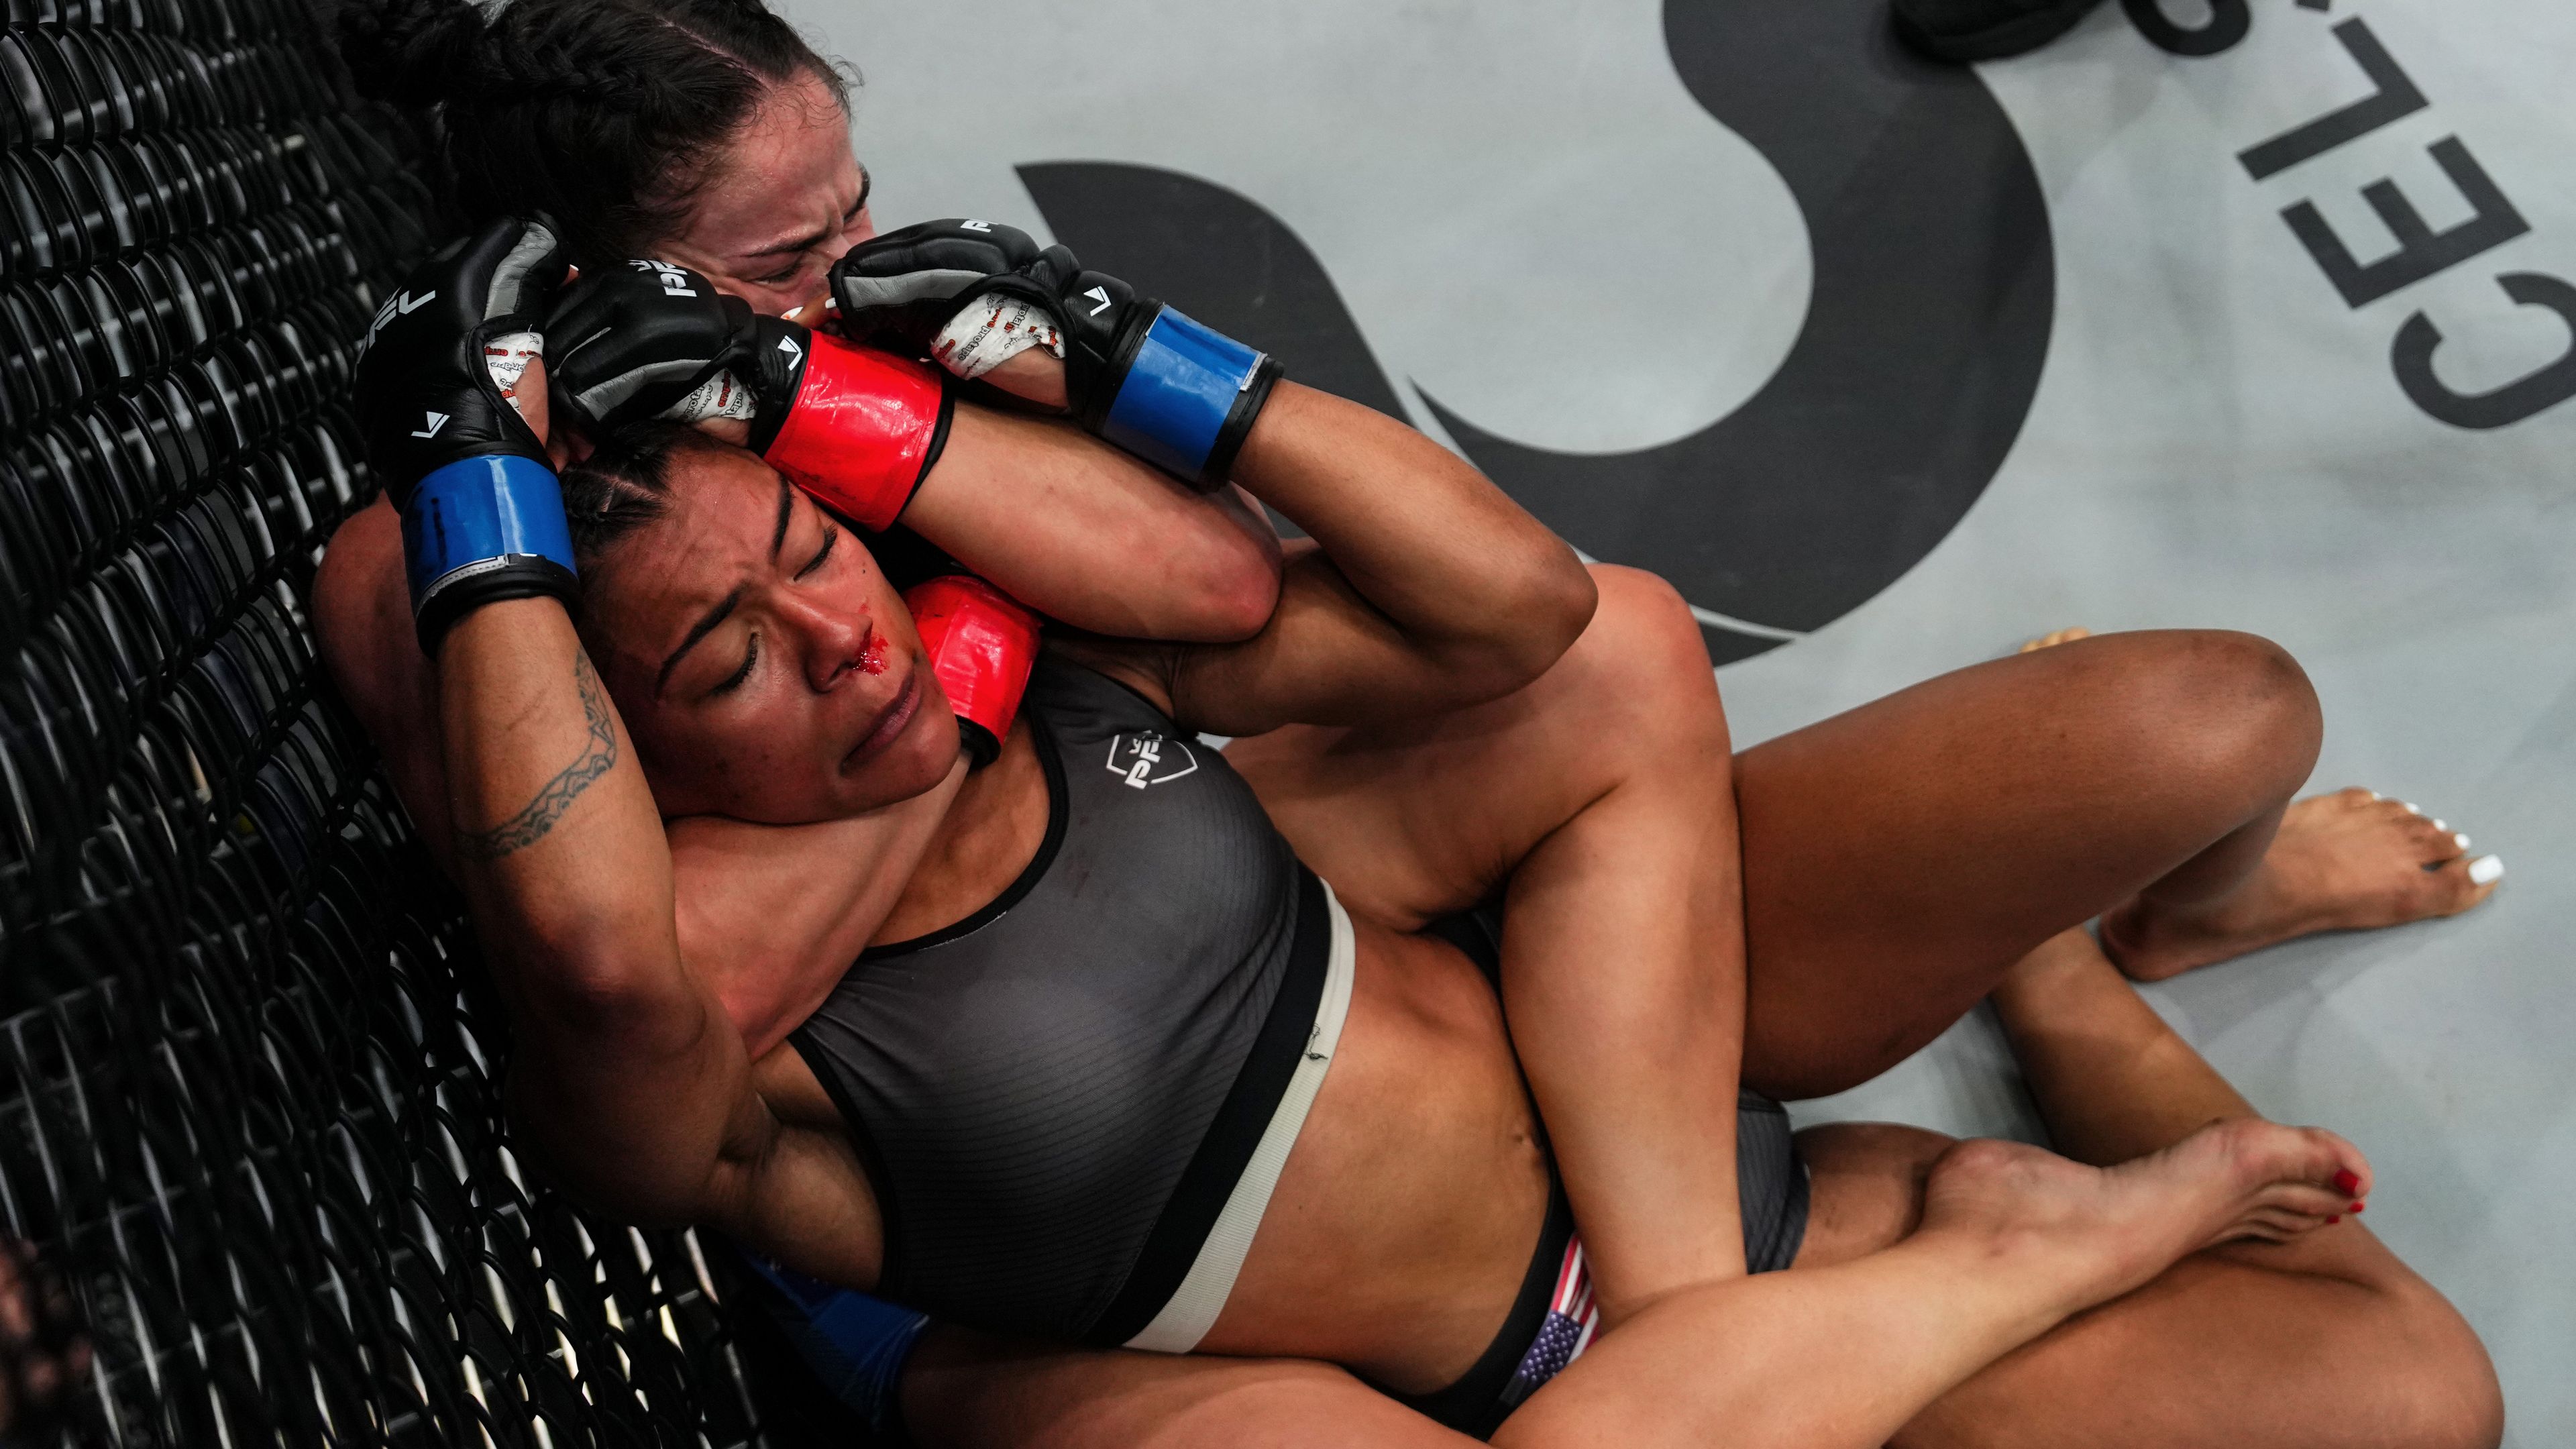 Chelsea Hackett works for a submission against Ky Bennett in her PFL Playoffs debut.